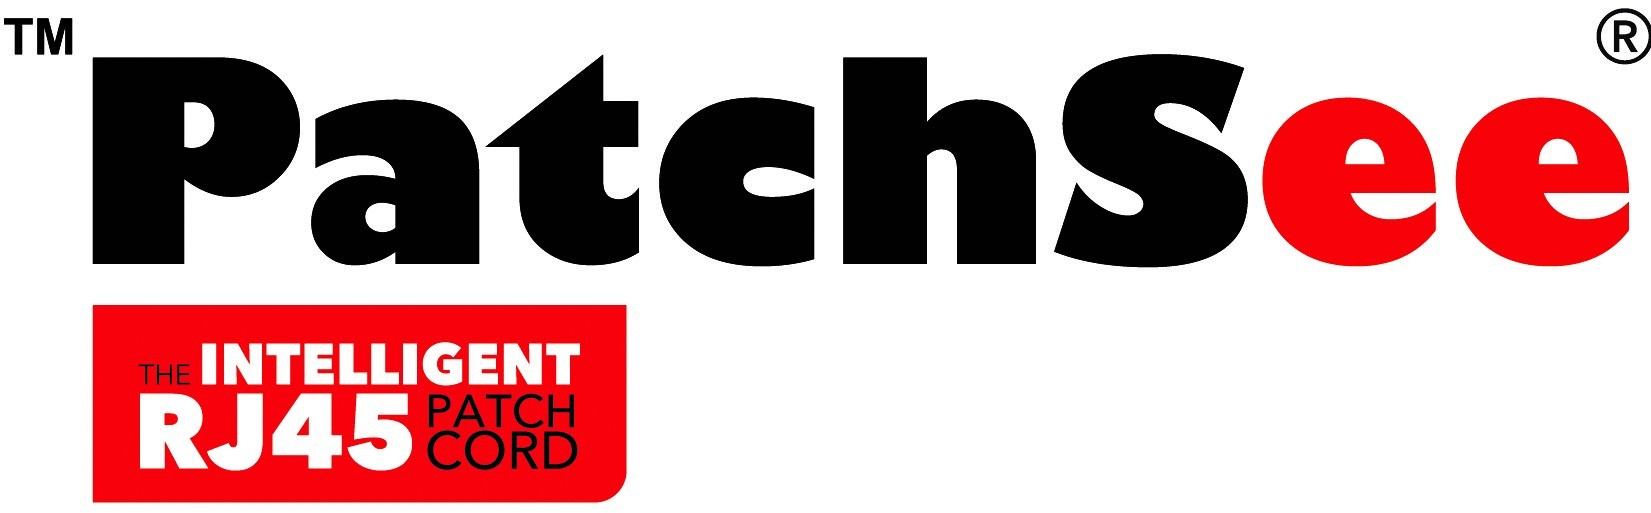 PATCHSEE_-_LOGO_HD_1